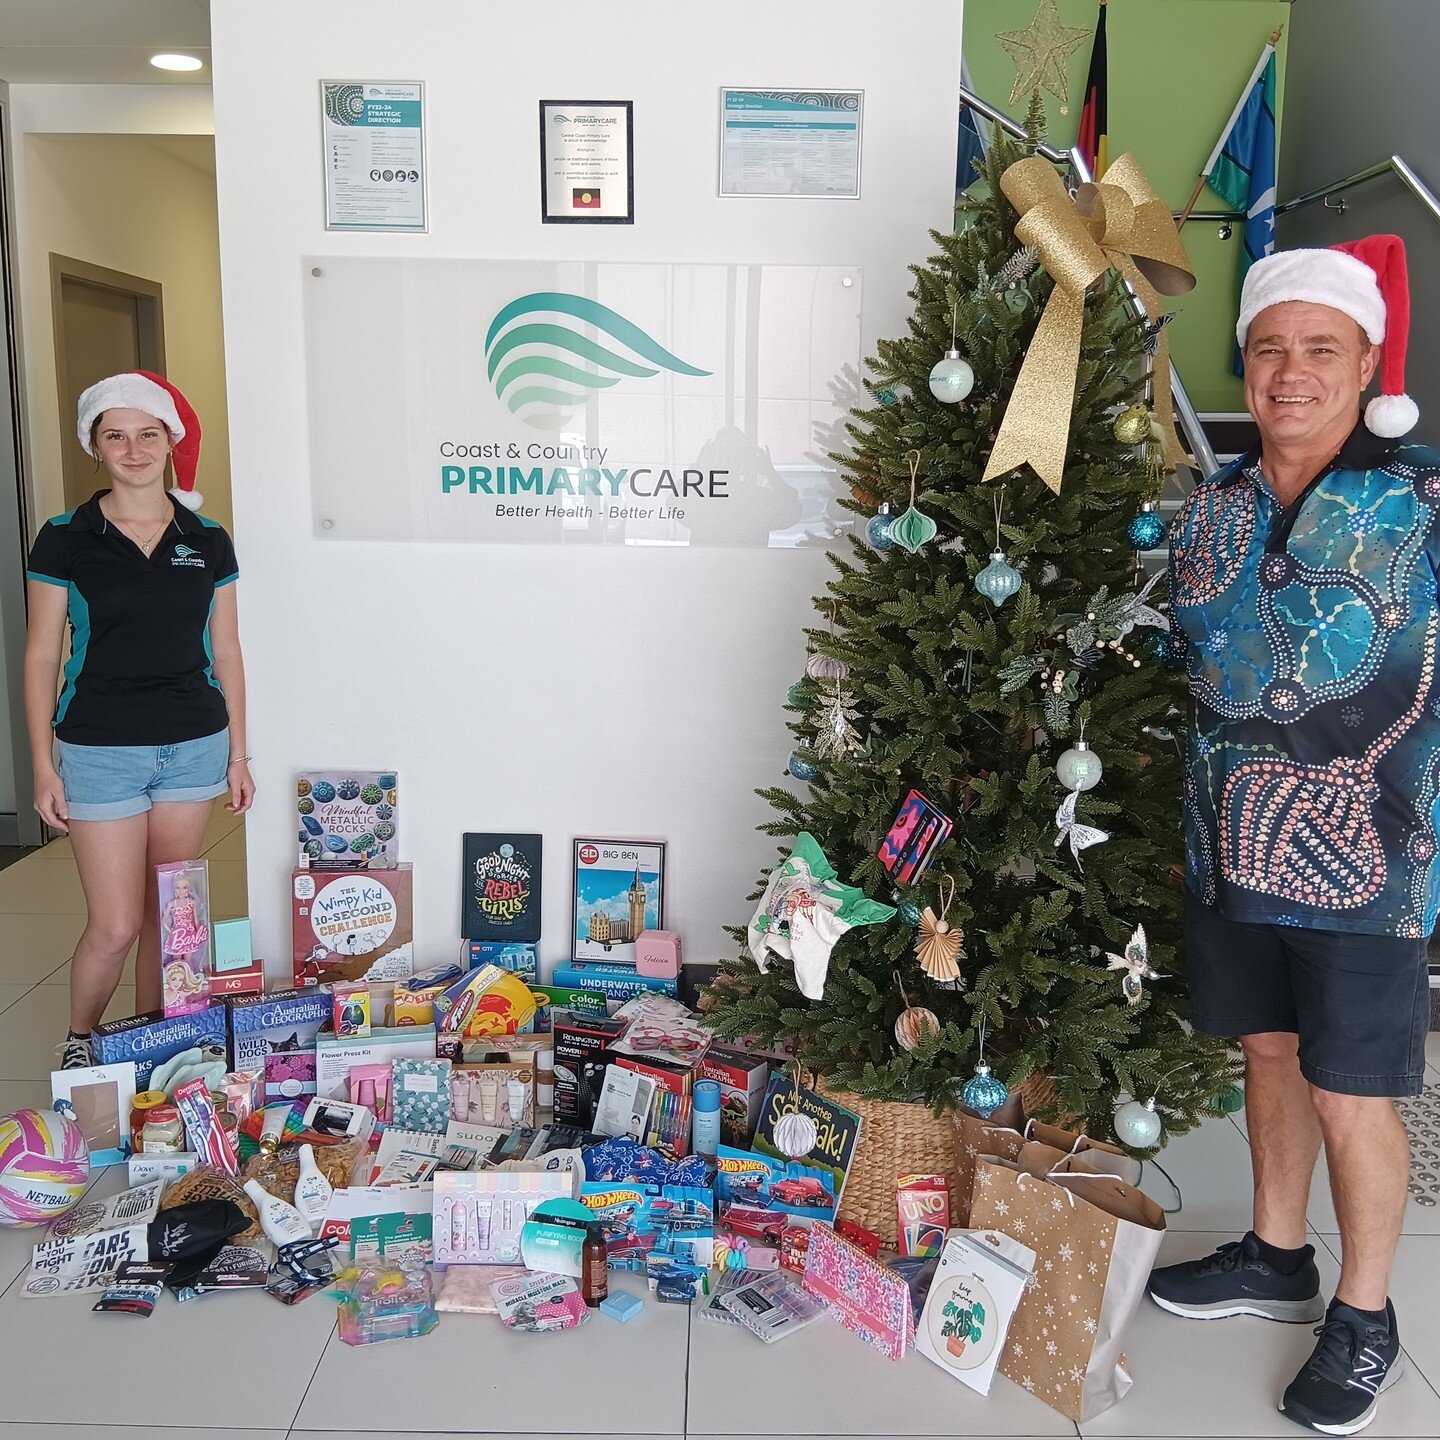 Wow! Thank you everyone! Our Christmas Appeal drive started today where we gifted our clients and those less fortunate in our community with the items you donated to our cause. We are overwhelmed by the generous support. A big thank you to services.a